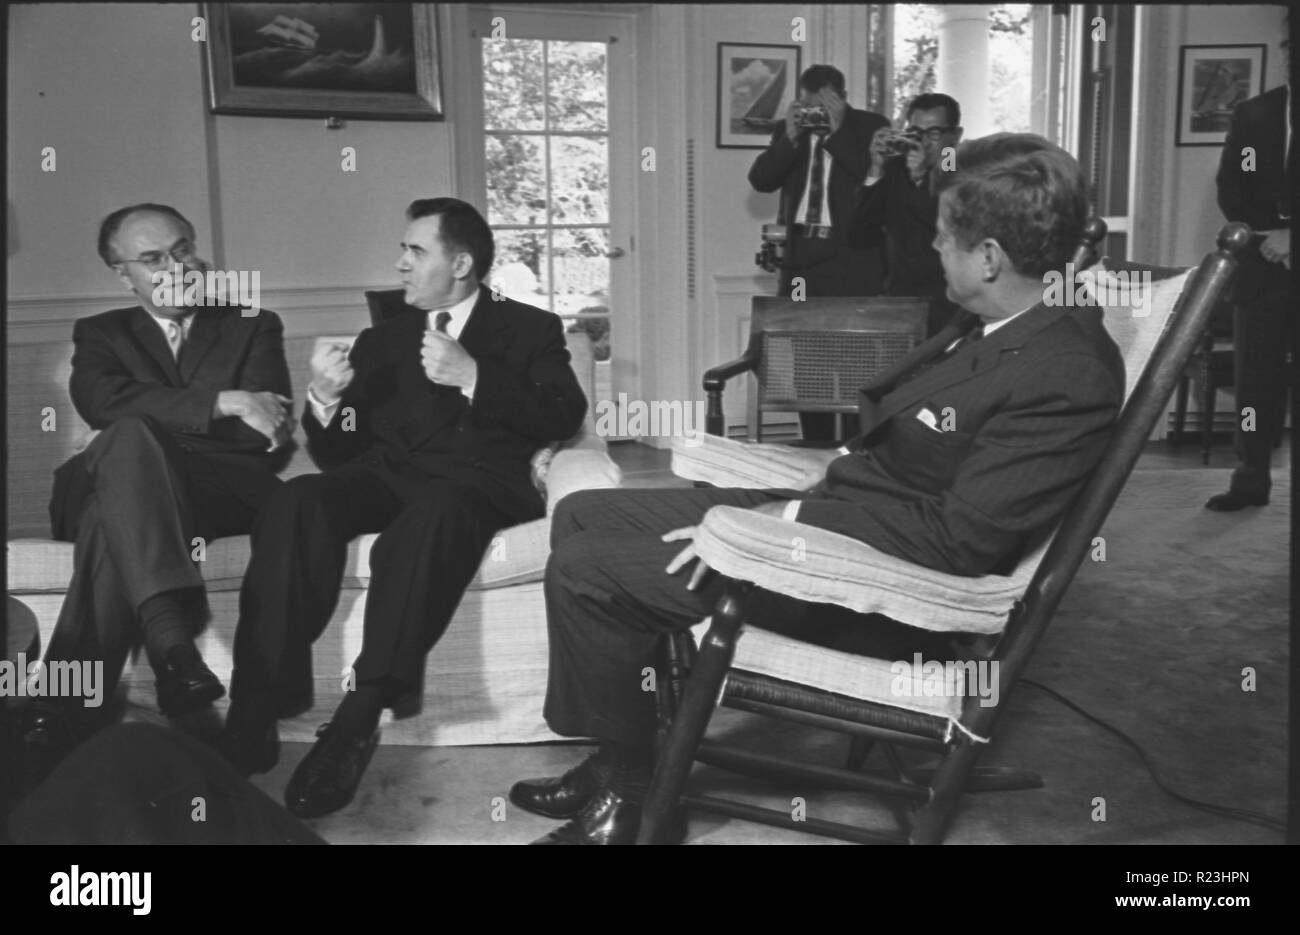 Soviet ambassador to the US, Anatoly F. Dobrynin and Soviet foreign minister Andrei Gromyko talking with President Kennedy who is seated in rocking chair, at the White House, Washington, D.C. during the Cuban missile crisis. October 18, 1962 Stock Photo